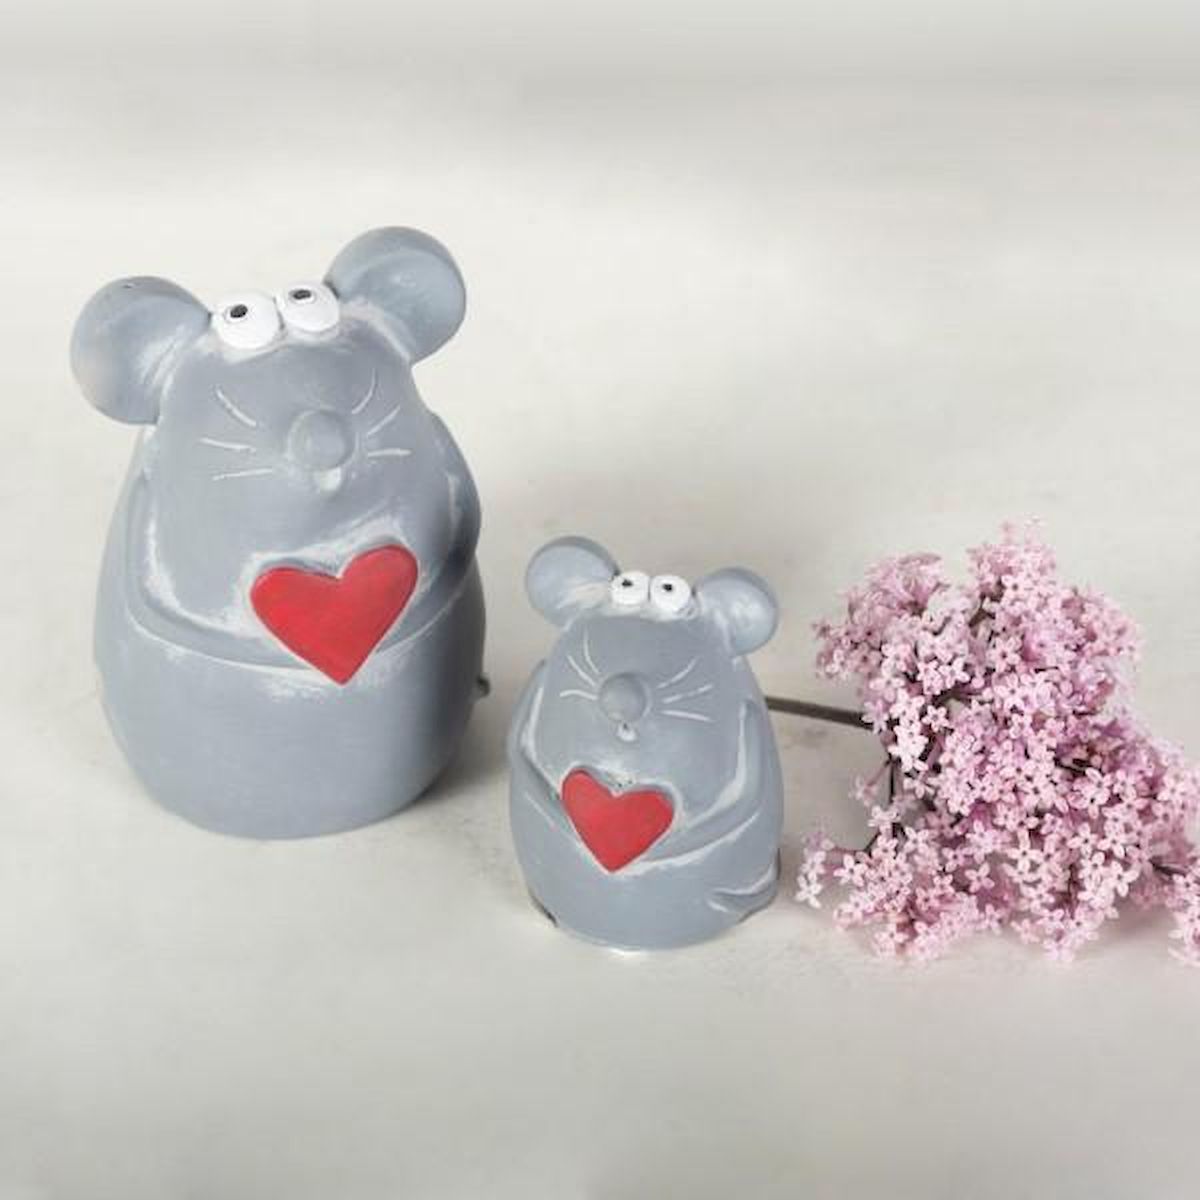 Picture of Forpost FP-CNP-177 Cement Mice Holding Hearts Figurine - Set of 2